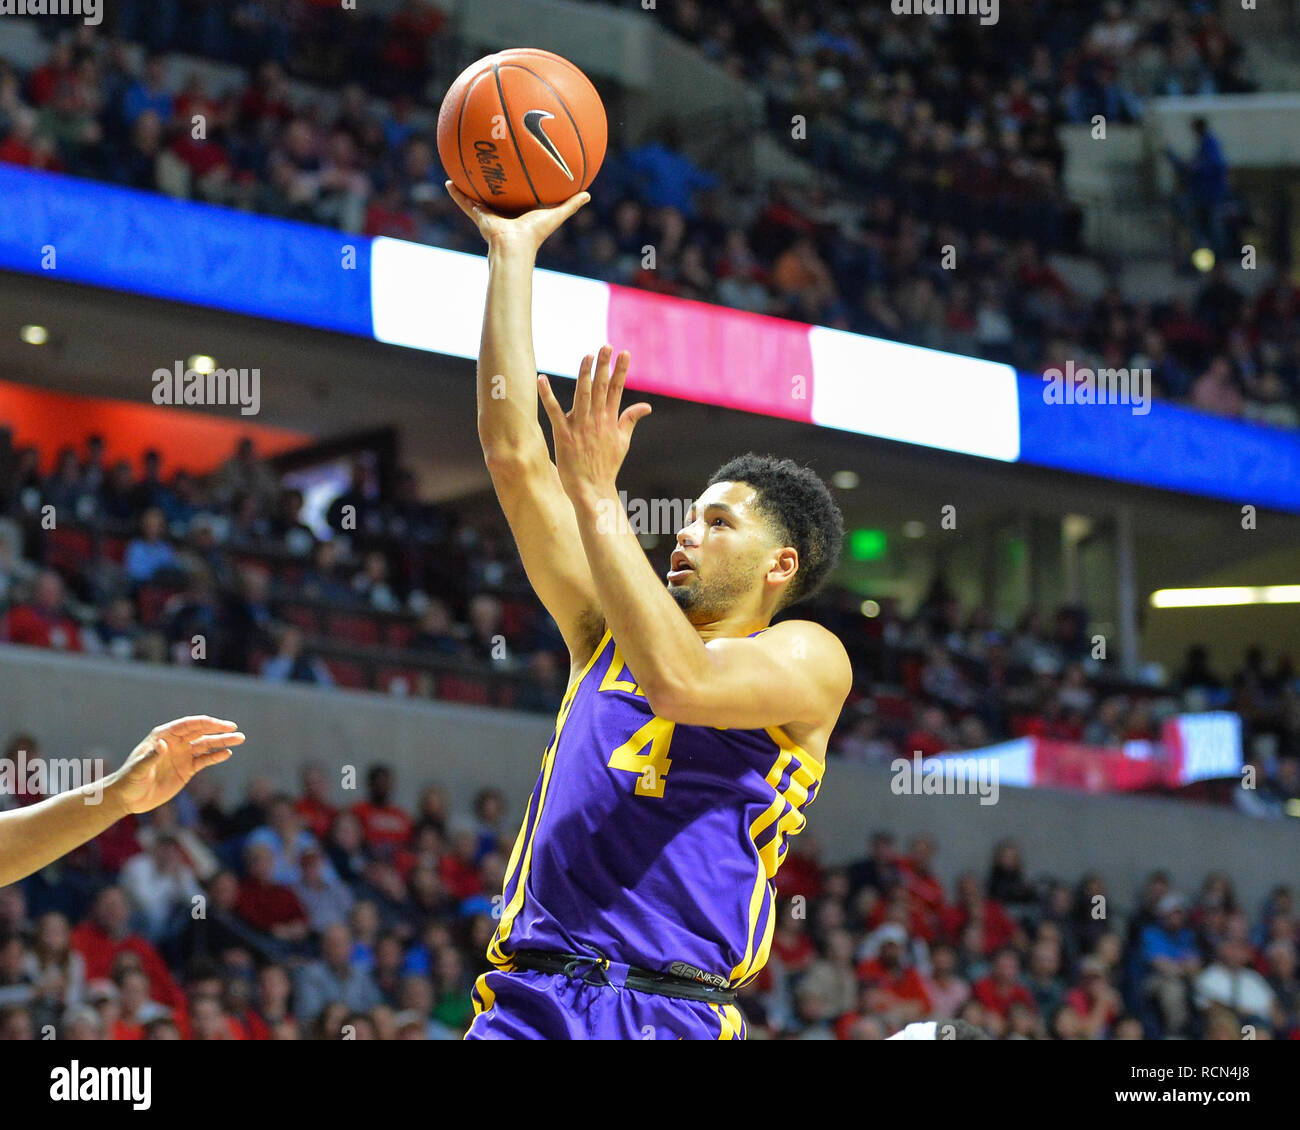 Oxford, MS, USA. 15th Jan, 2019. LSU guard, Skylar Mays (4), drives to the  basket during the NCAA basketball game between the LSU Tigers and the Ole'  Miss Rebels at the Pavillion